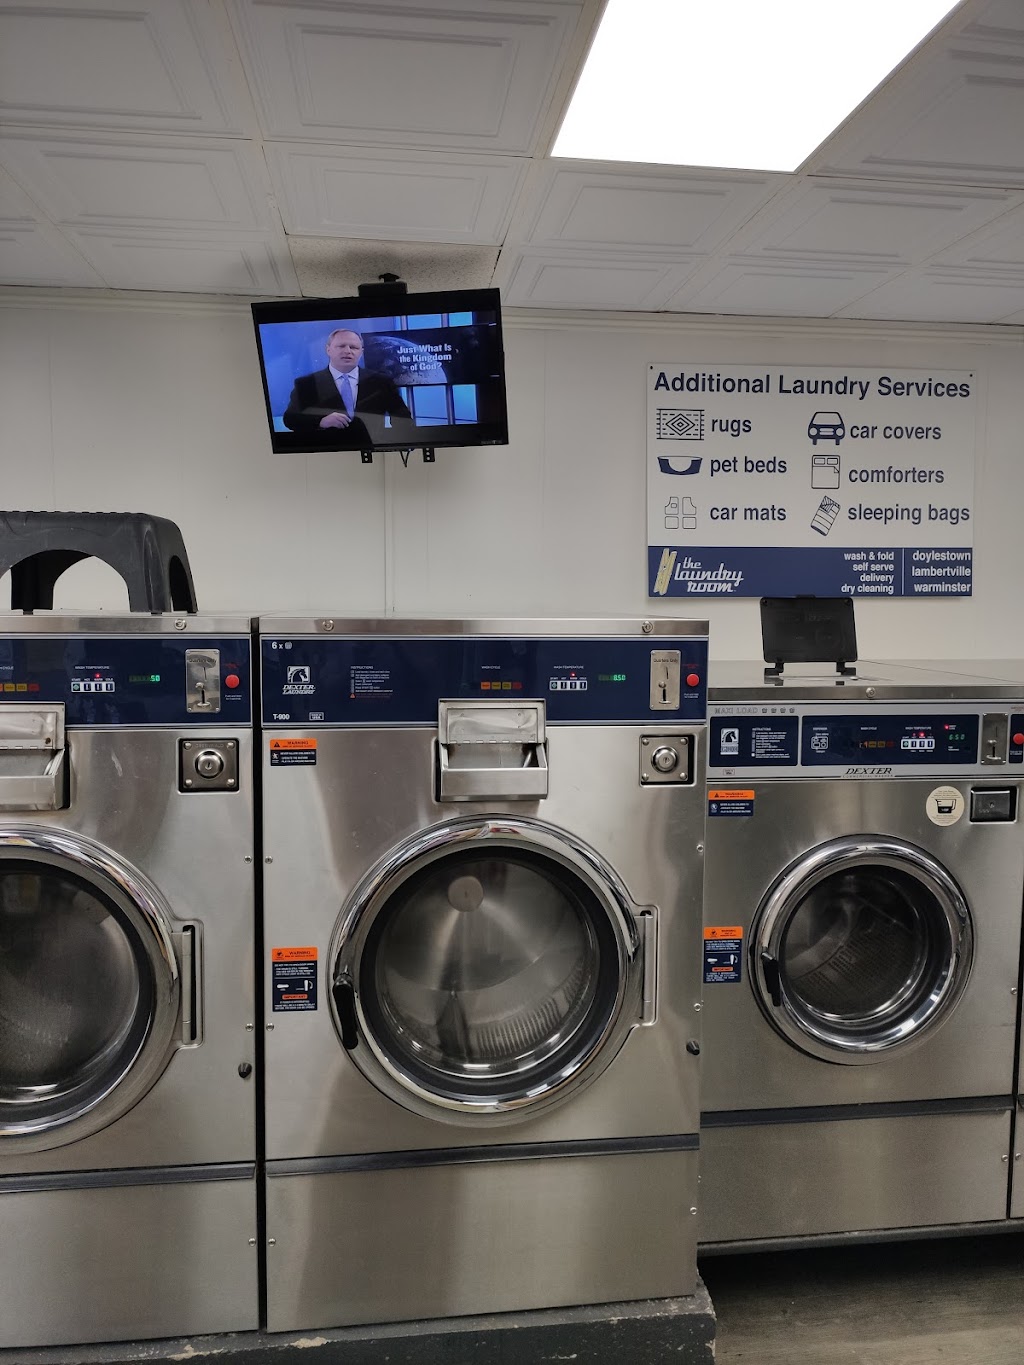 The Laundry Stop | 265 E. County Line Road, Shopping Center, County Line Rd, Hatboro, PA 19040 | Phone: (215) 436-8187